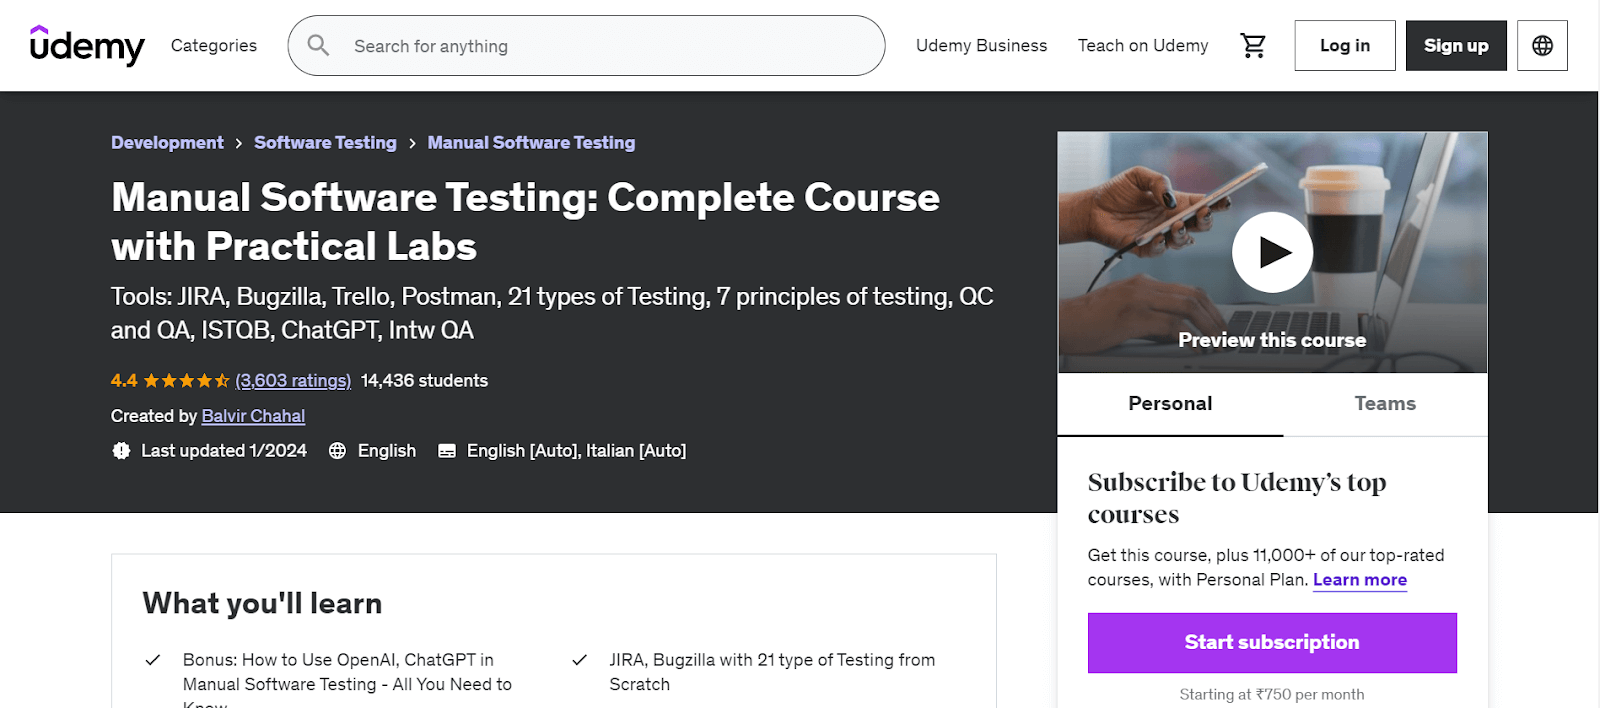 Manual Software Testing Complete Course with Practical Labs